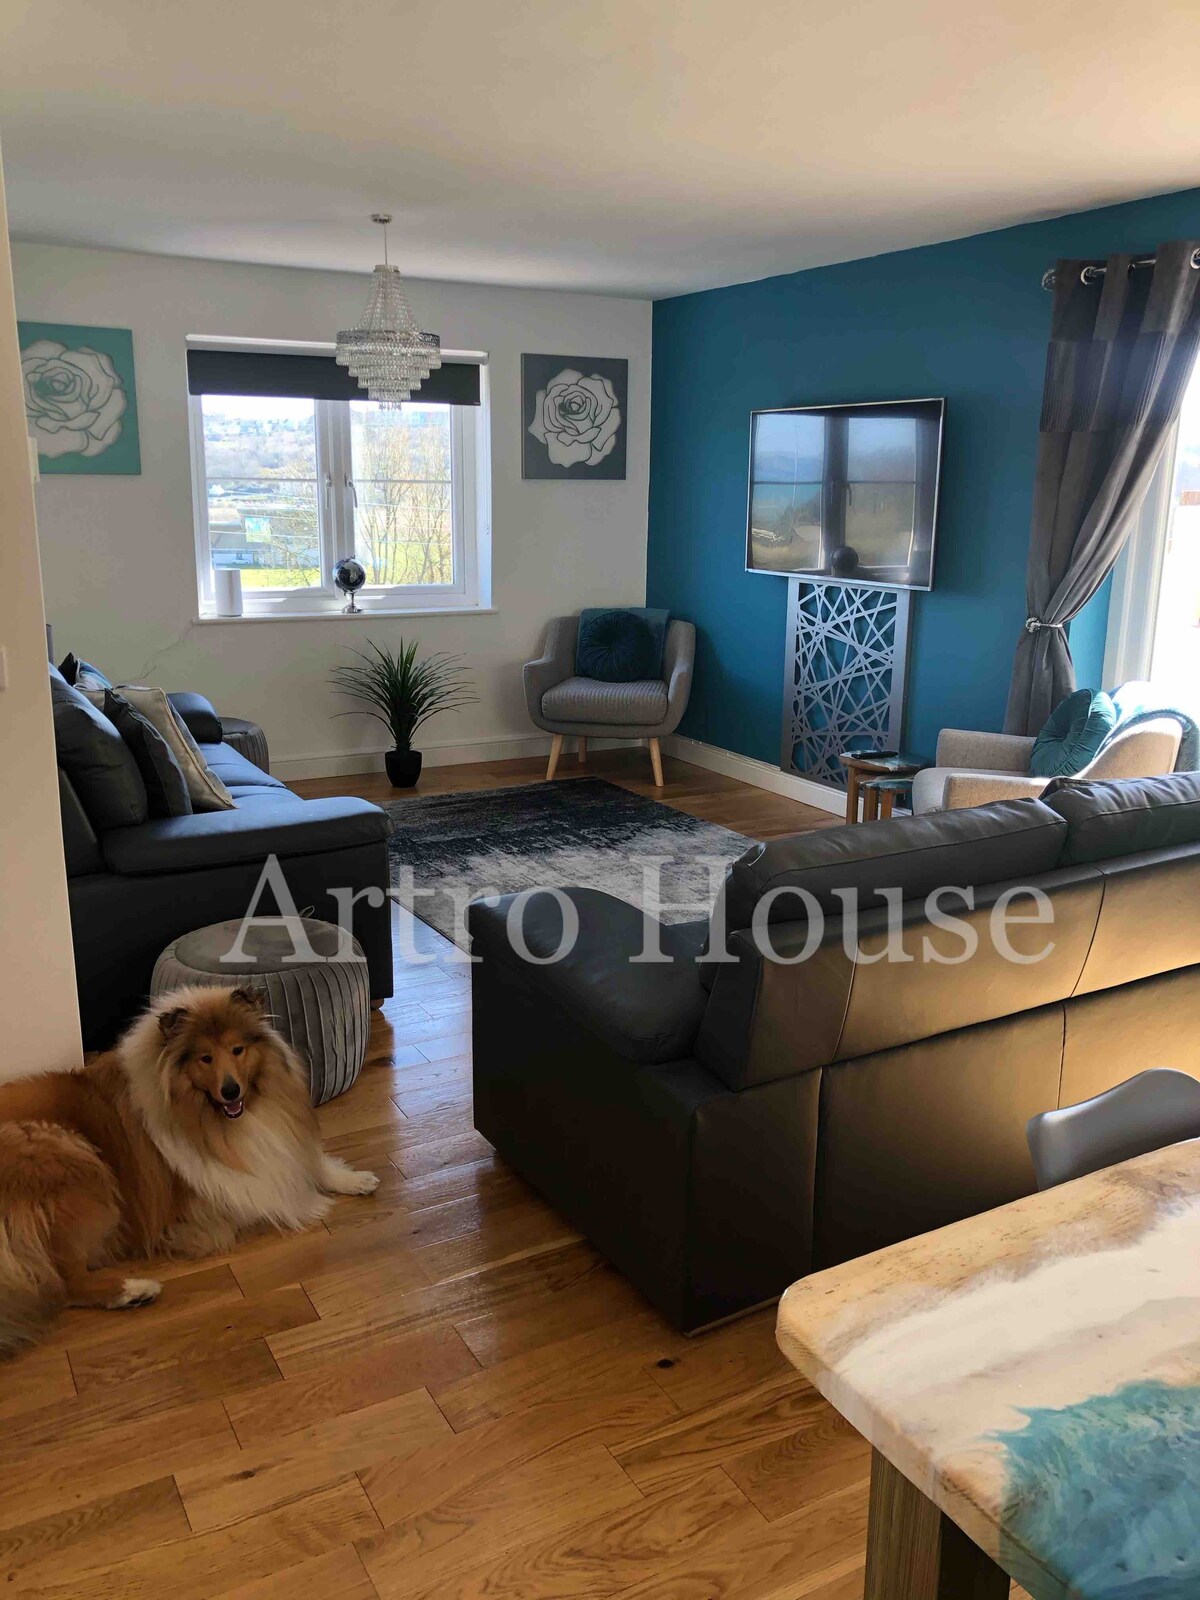 Luxury Dog Friendly Holiday Home With Hot Tub